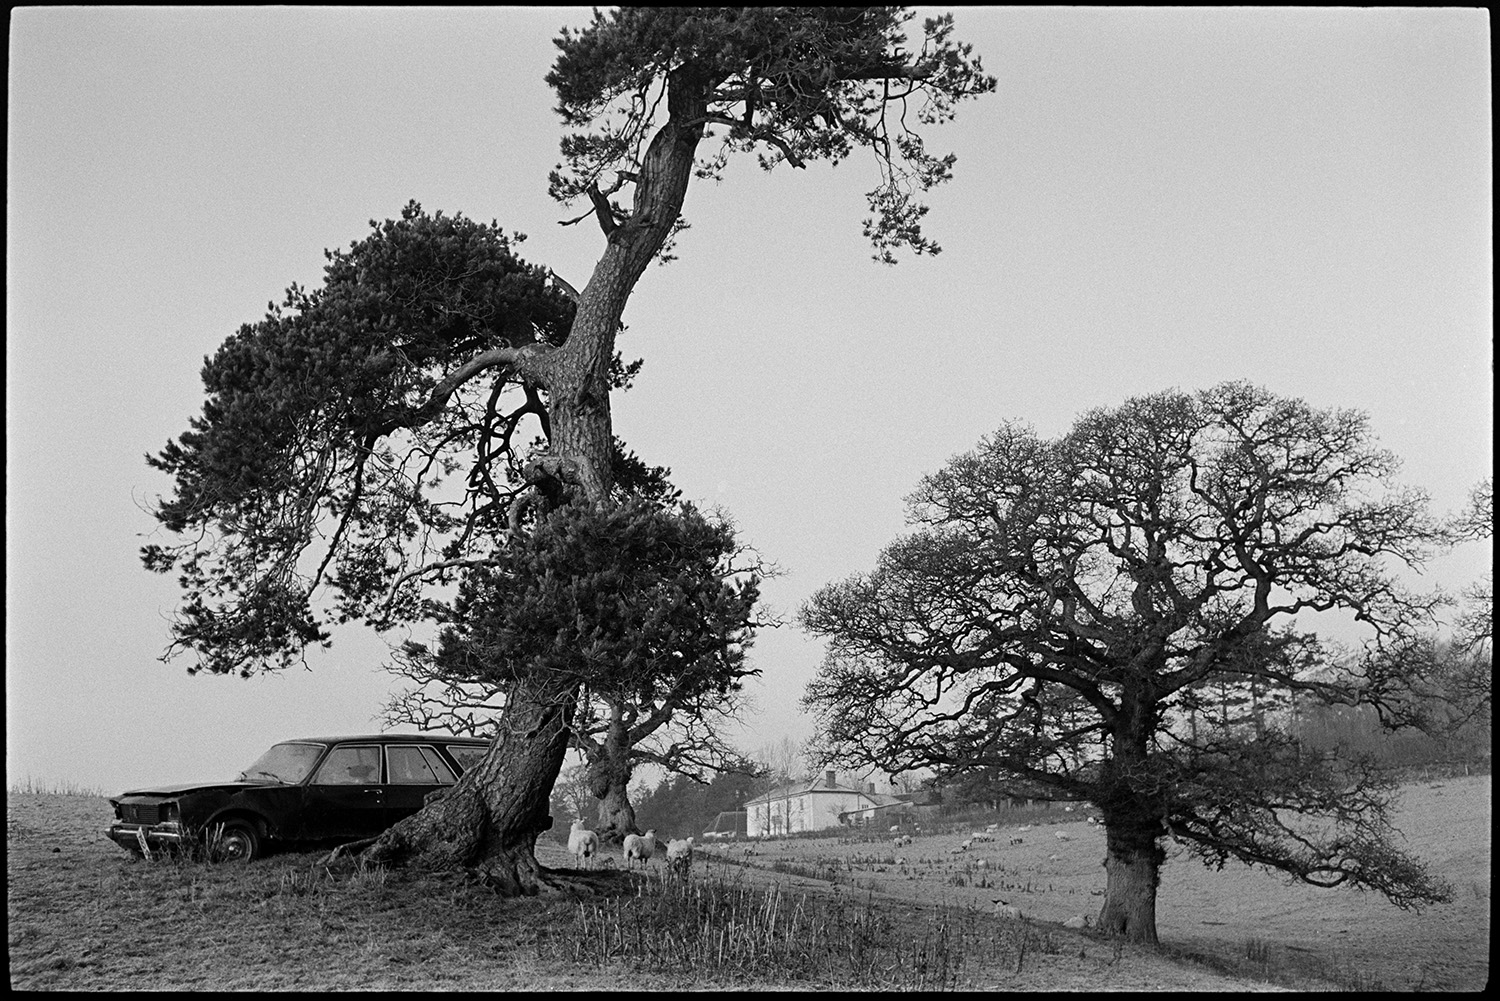 Large trees in field with sheep, abandoned car under fir tree, early morning.
[An abandoned estate car  by the base of a tall fir tree in a field at Brushford Barton. A flock of sheep and an oak tree is also in the field. Brushford Barton farmhouse is visible in the background.]